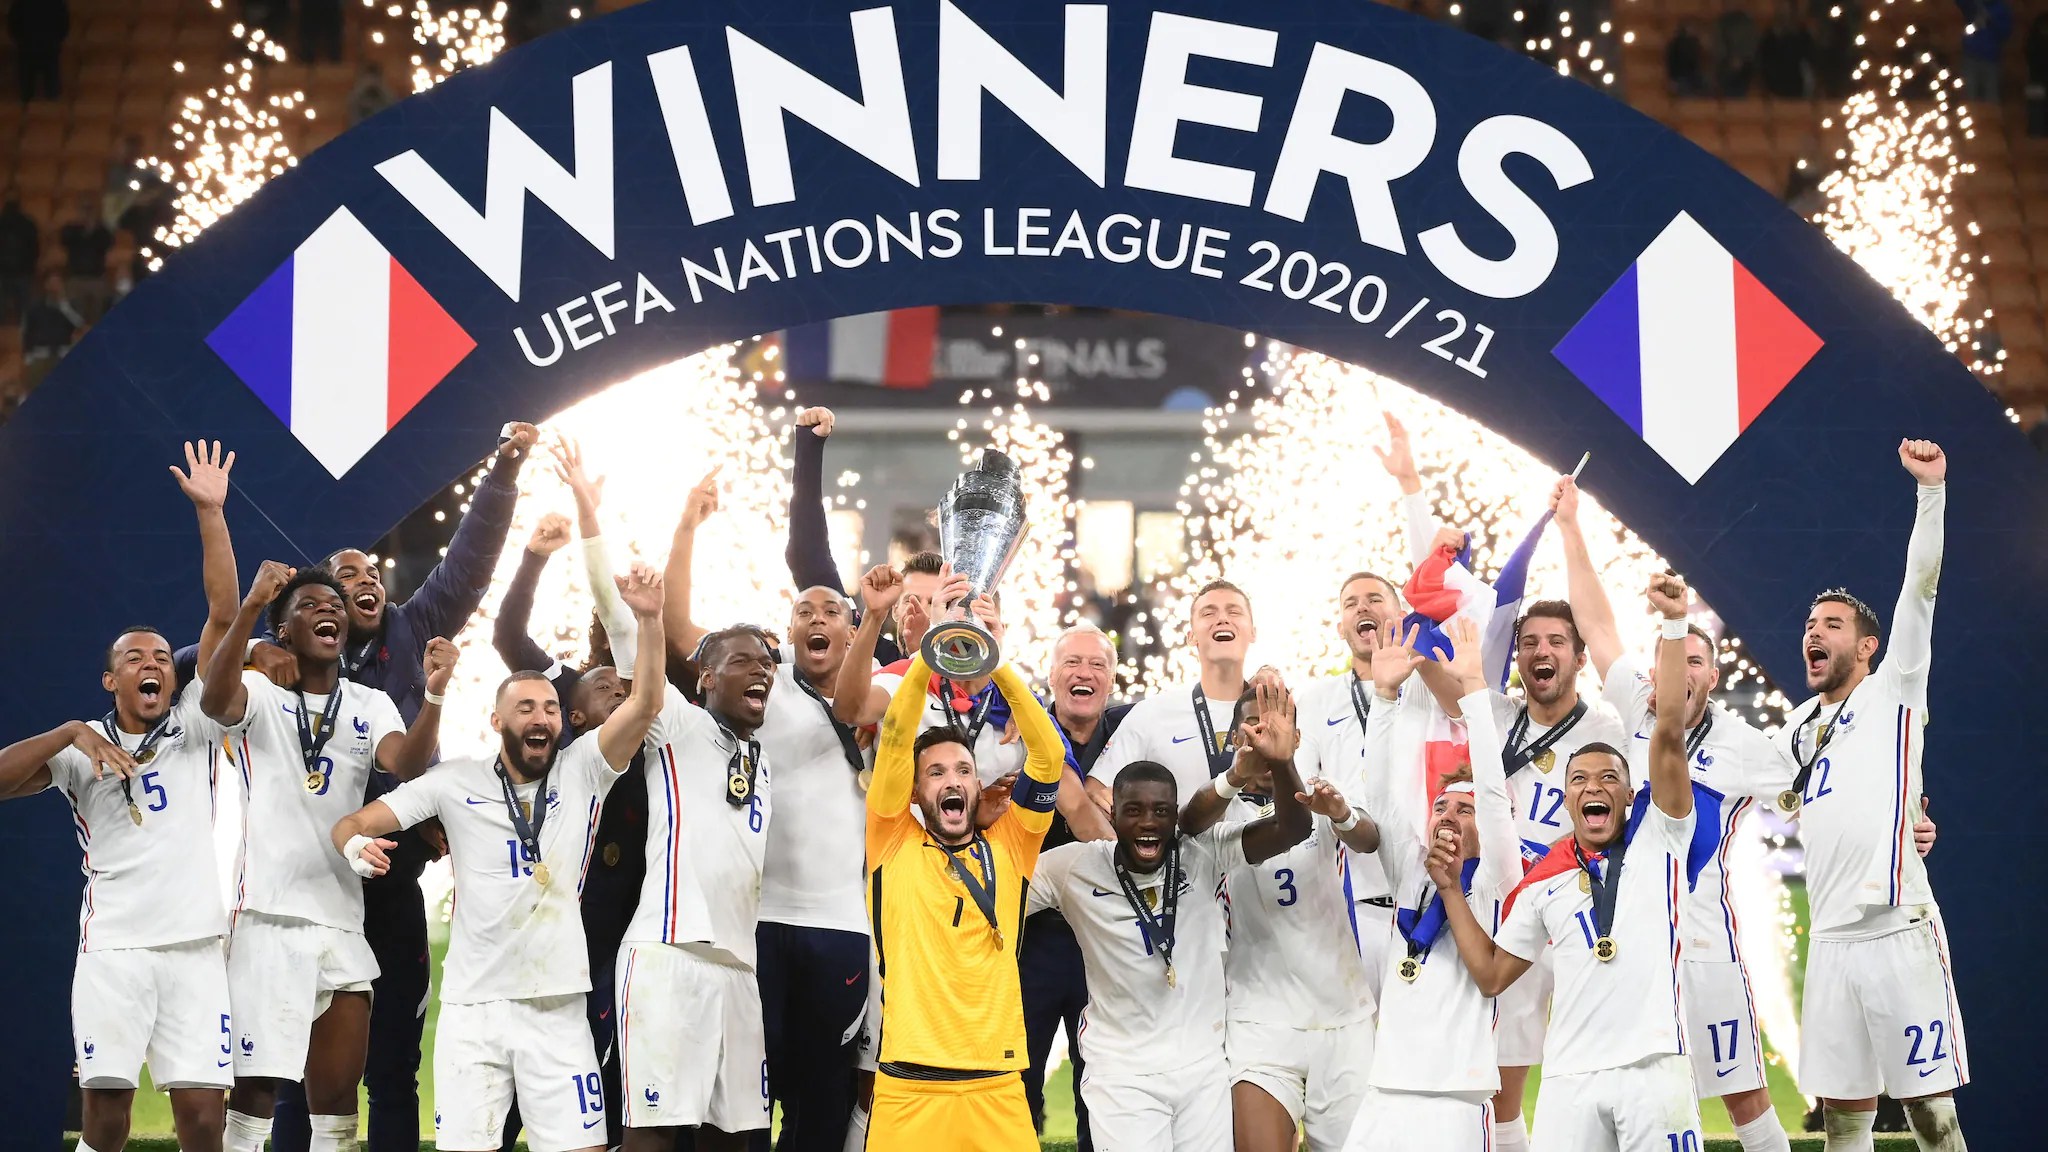 UEFA Nations League: Check out Latest Nations League 2022/23 Points Table, Fixtures and Full Schedule, Follow UNL Live Updates